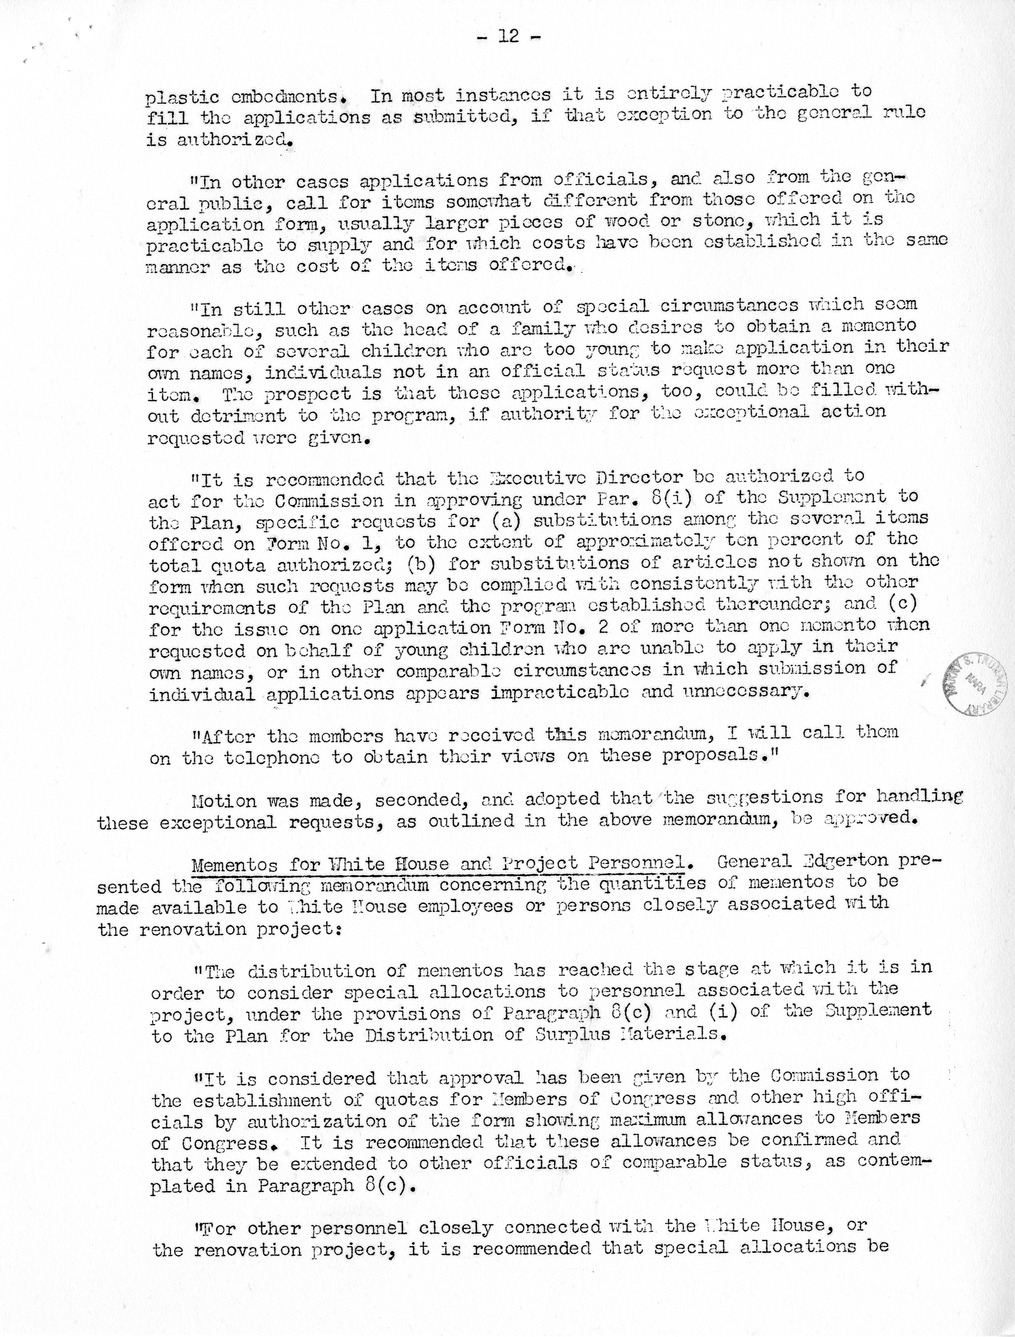 Minutes of the Fortieth Meeting of the Commission on Renovation of the Executive Mansion